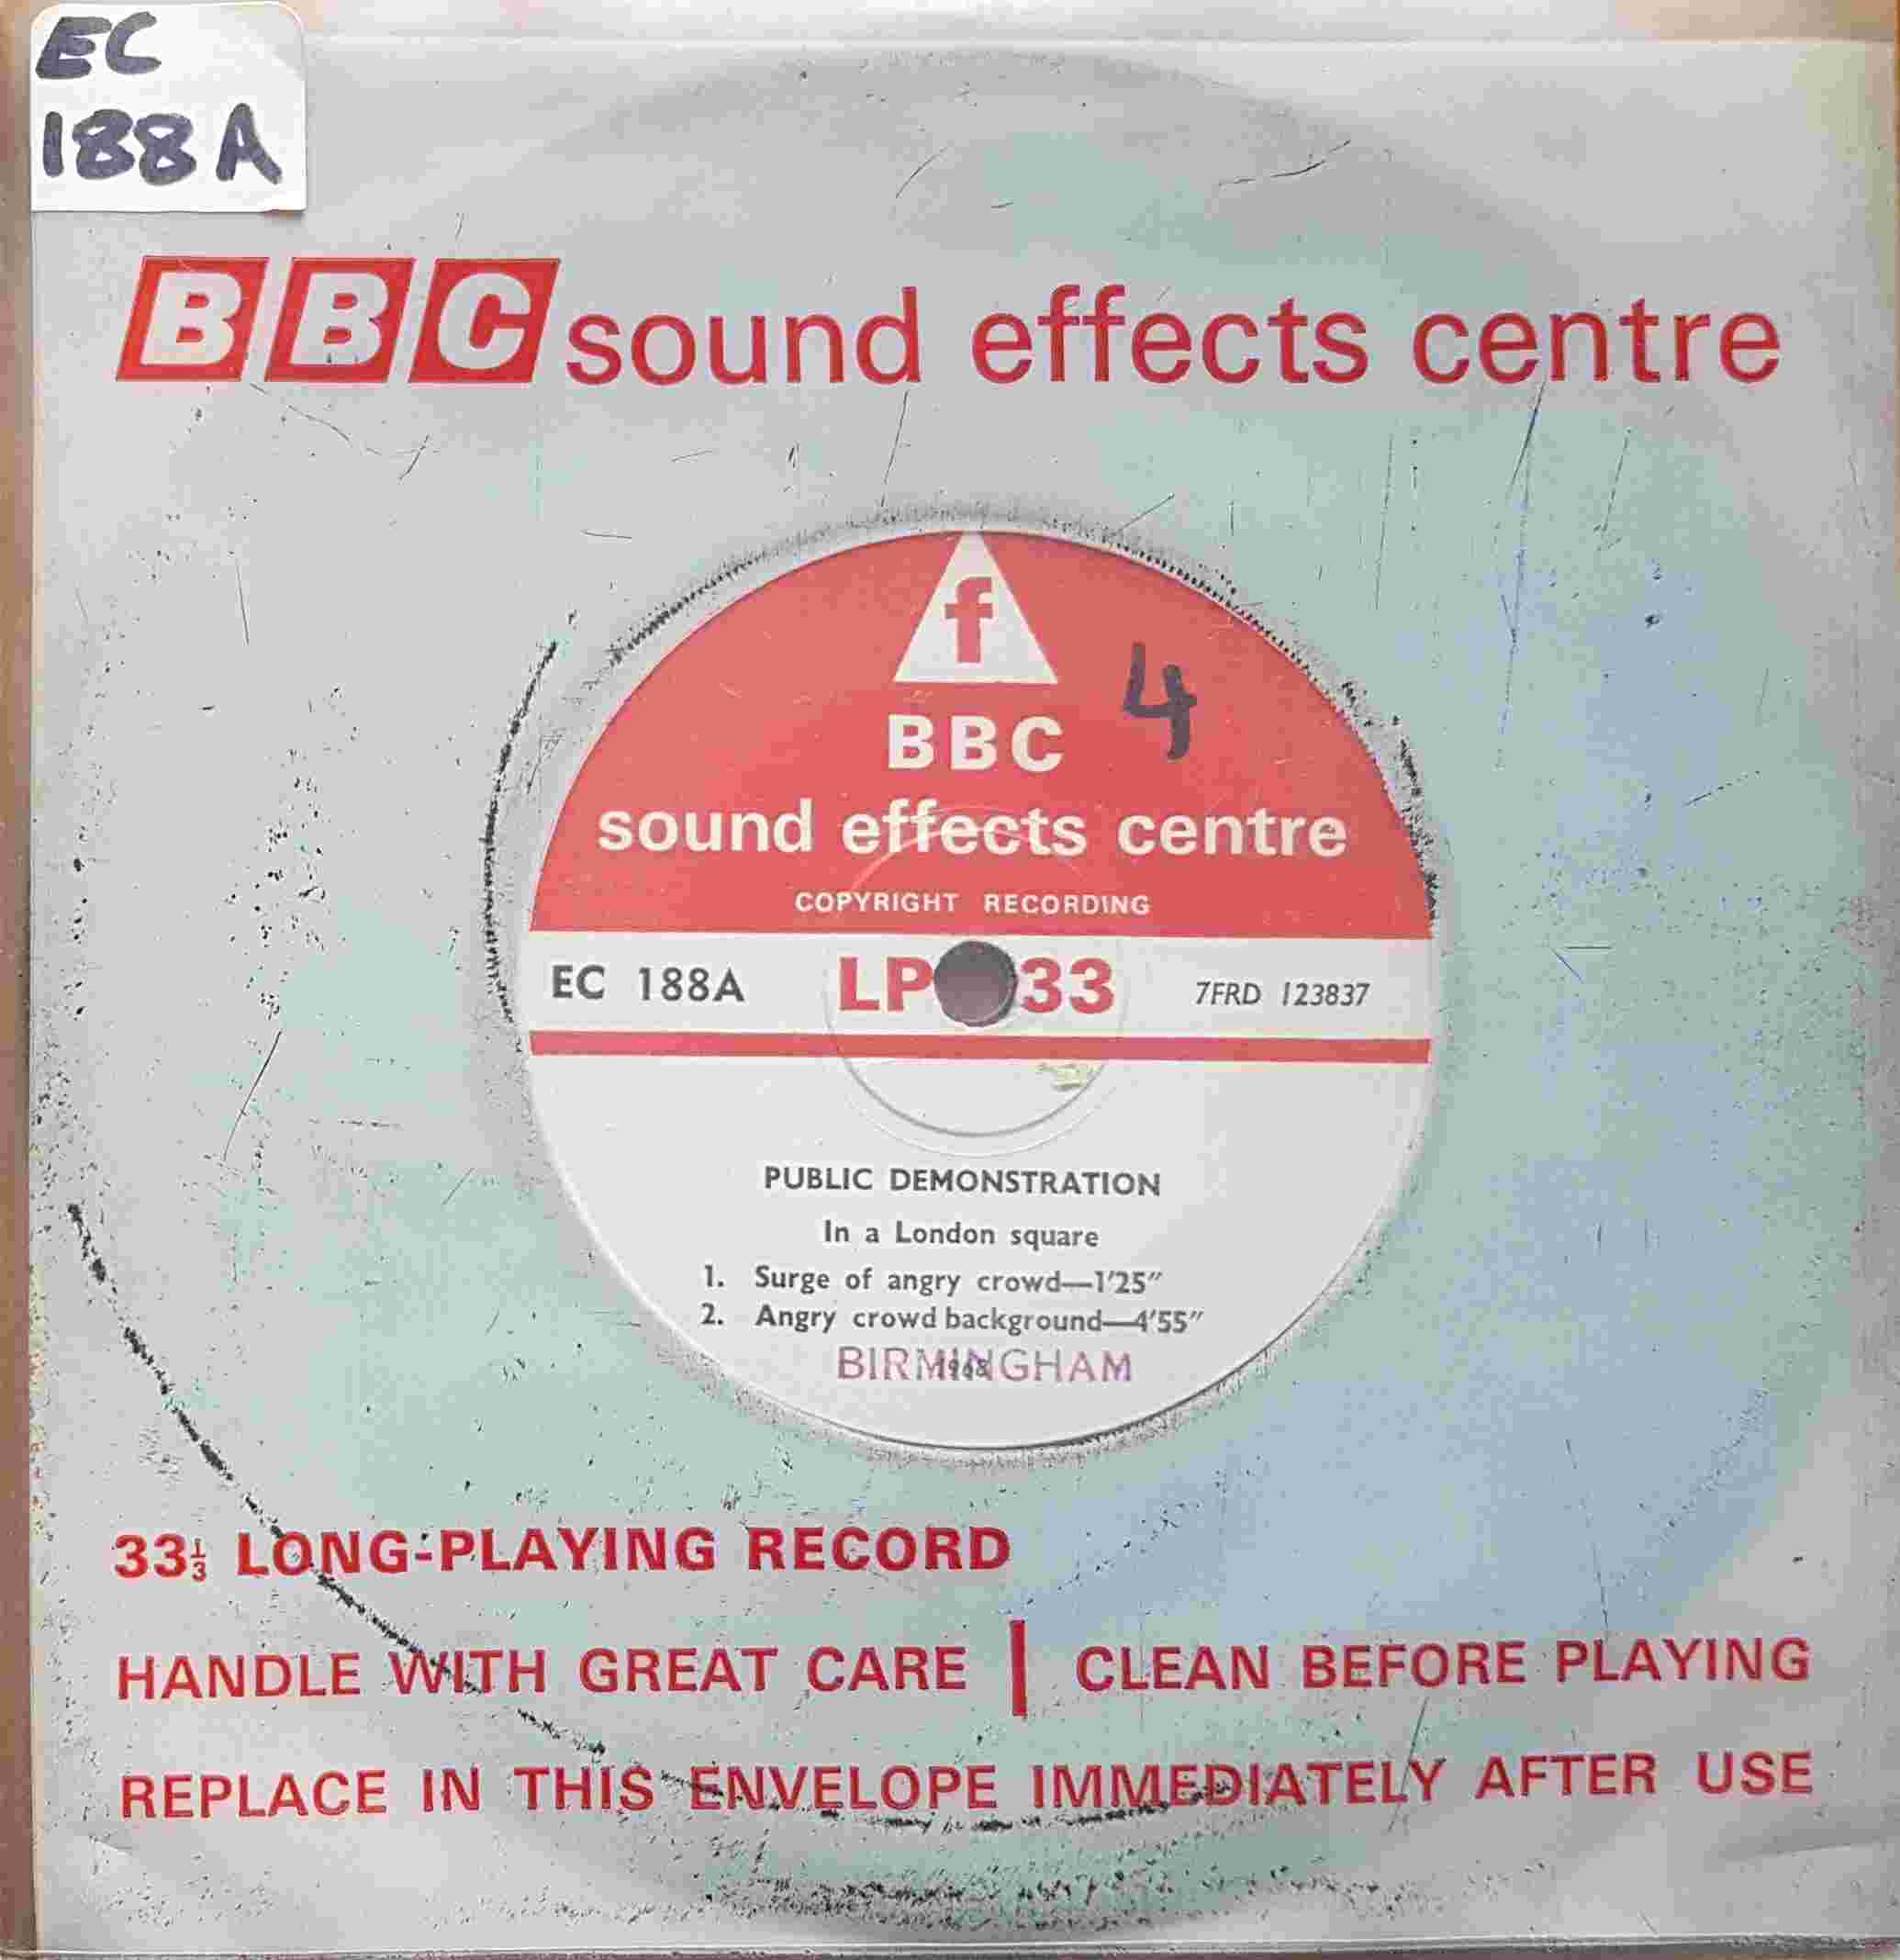 Picture of EC 188A Public demonstration - In a London square by artist Not registered from the BBC singles - Records and Tapes library